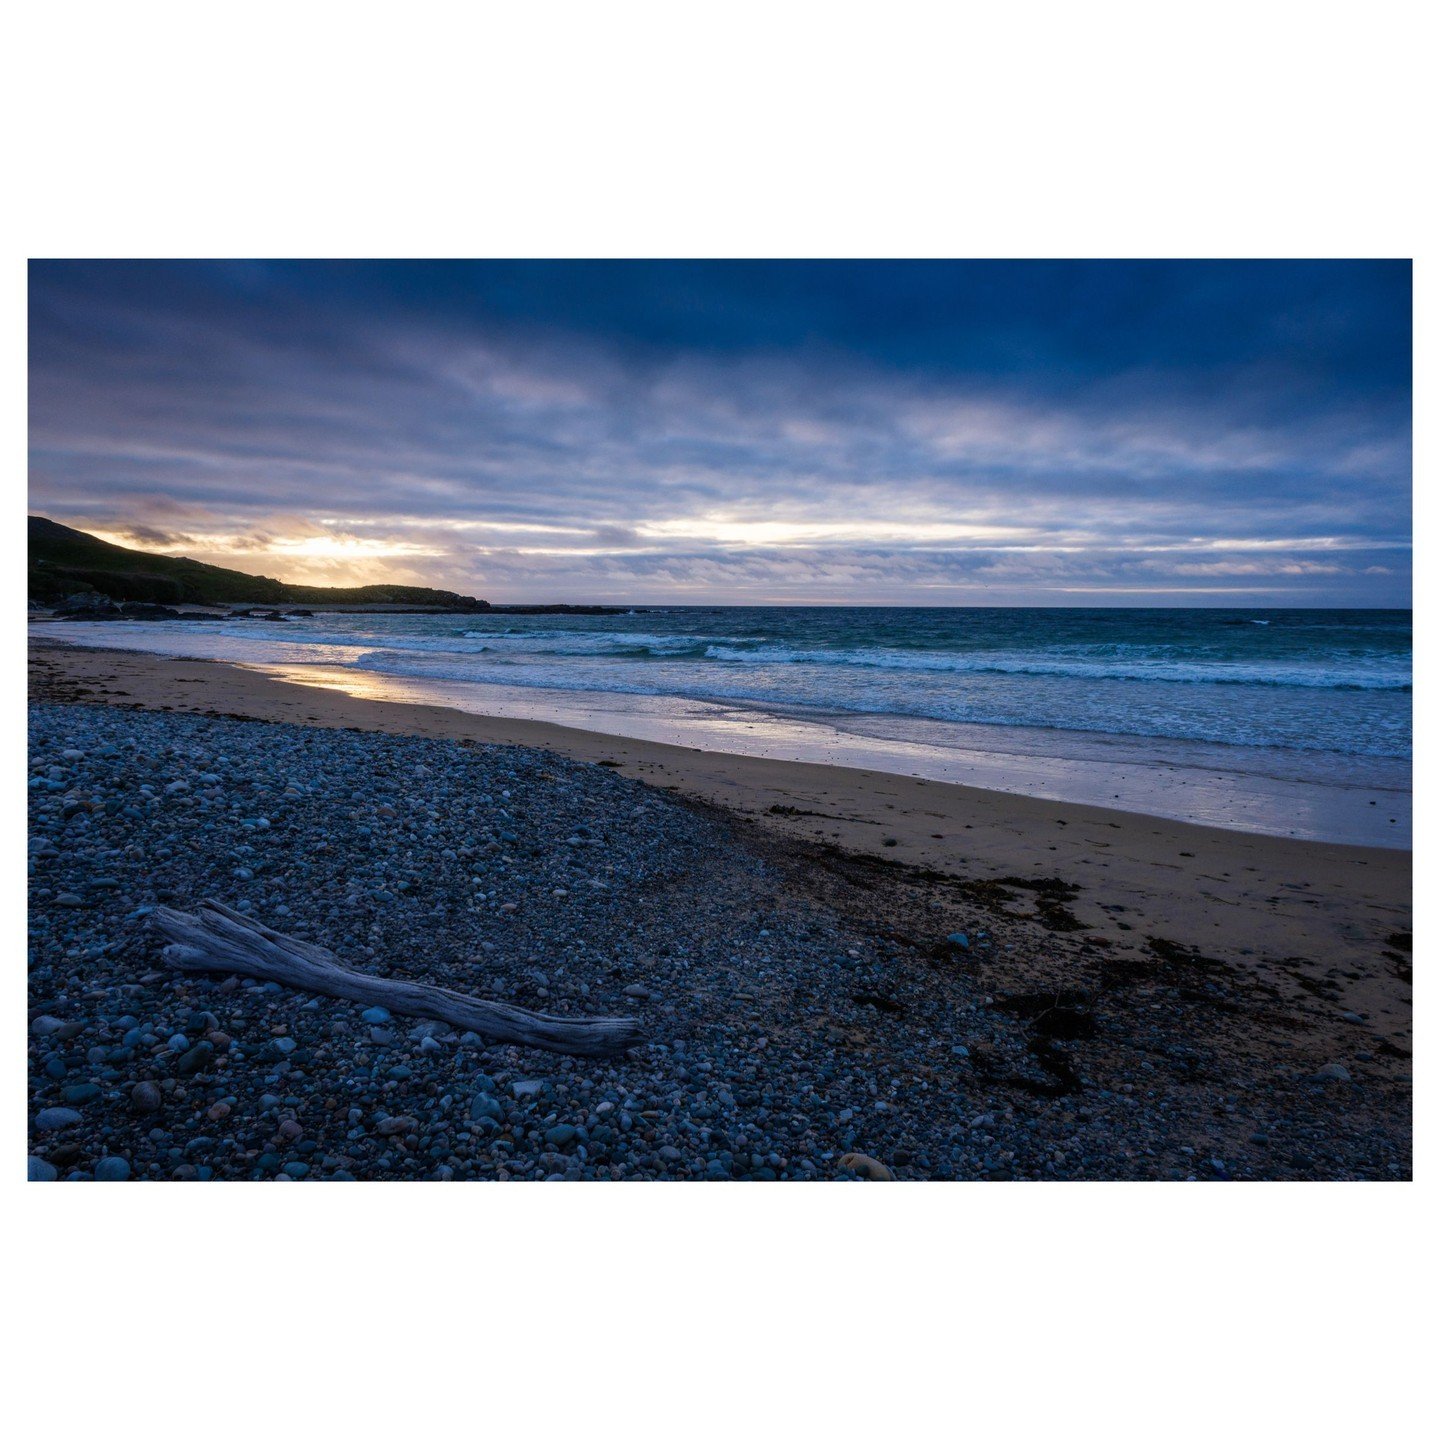 The beautiful Pollan bay beach at sunset. Inishowen peninsula in Donegal! Beautiful scenery and so quiet! Almost no one there while we were there!

#wildatlanticway #Ireland #donegal #loveireland #discoverireland